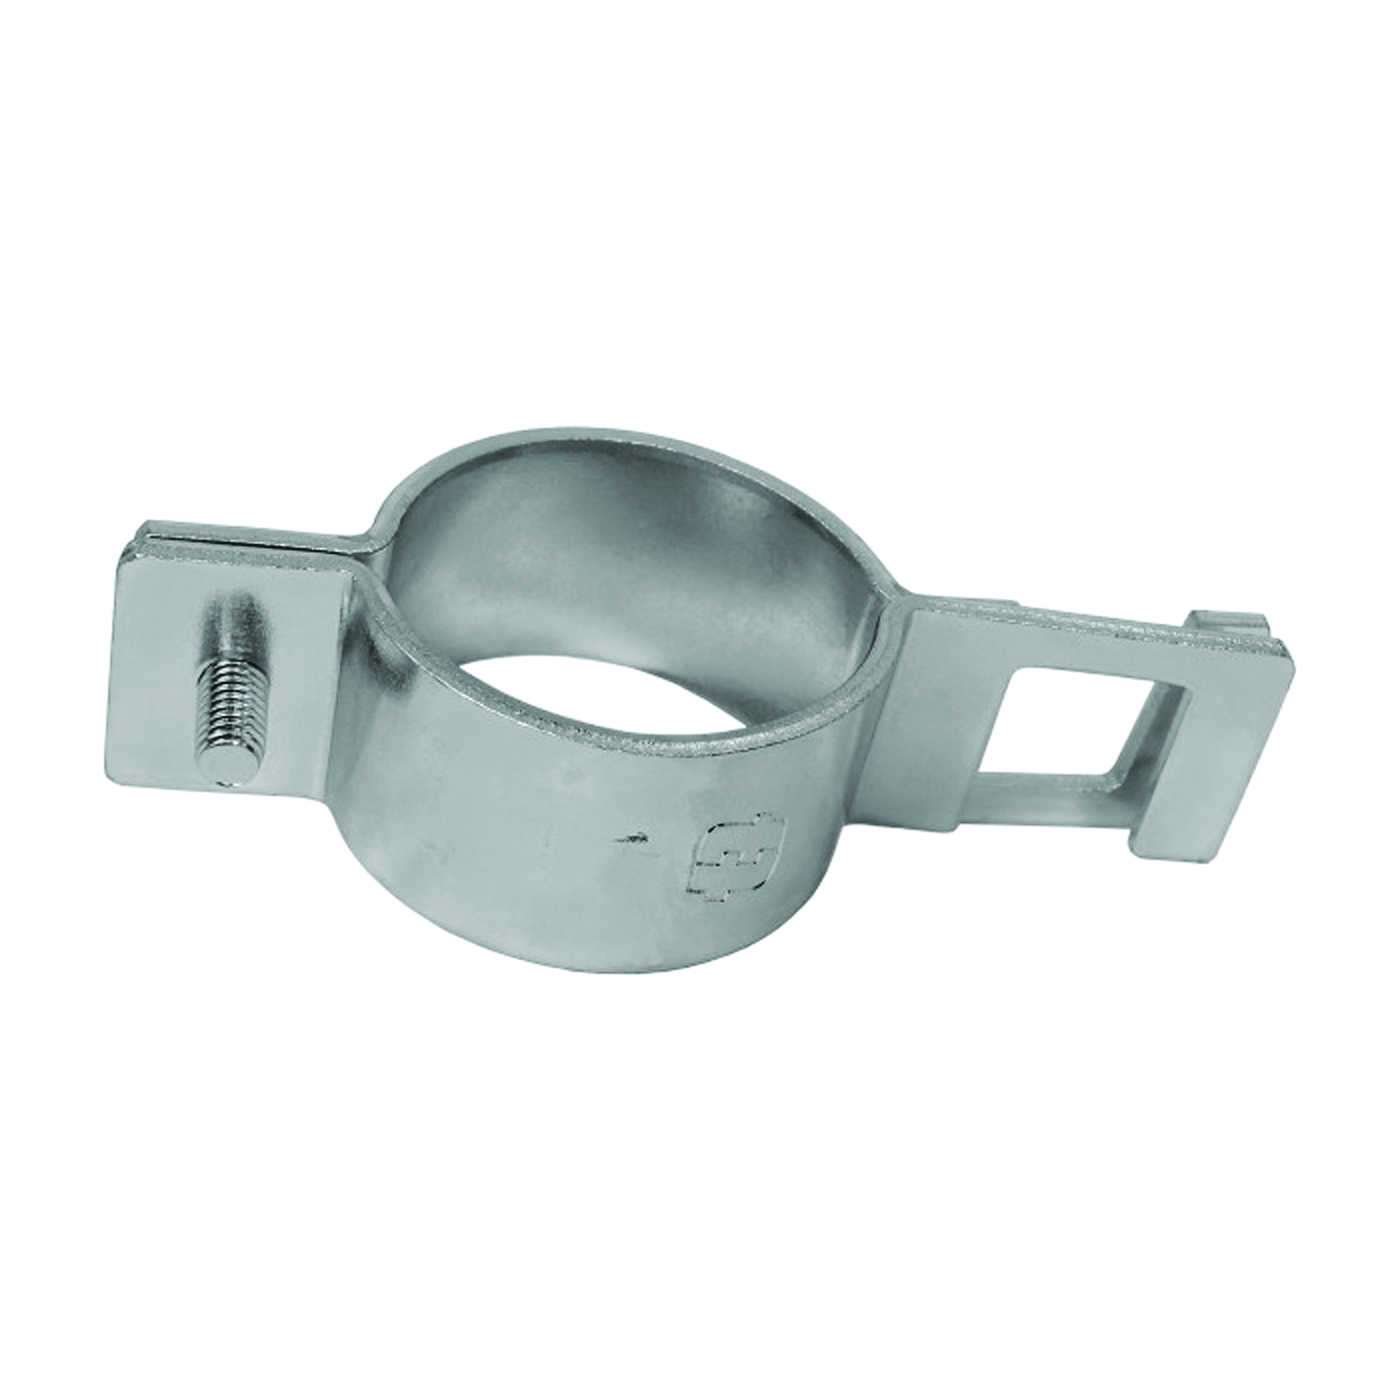 BQ11-1R Boom Clamp, Round, Steel, For: Clamp that Holds Sprayer Nozzle Bodies